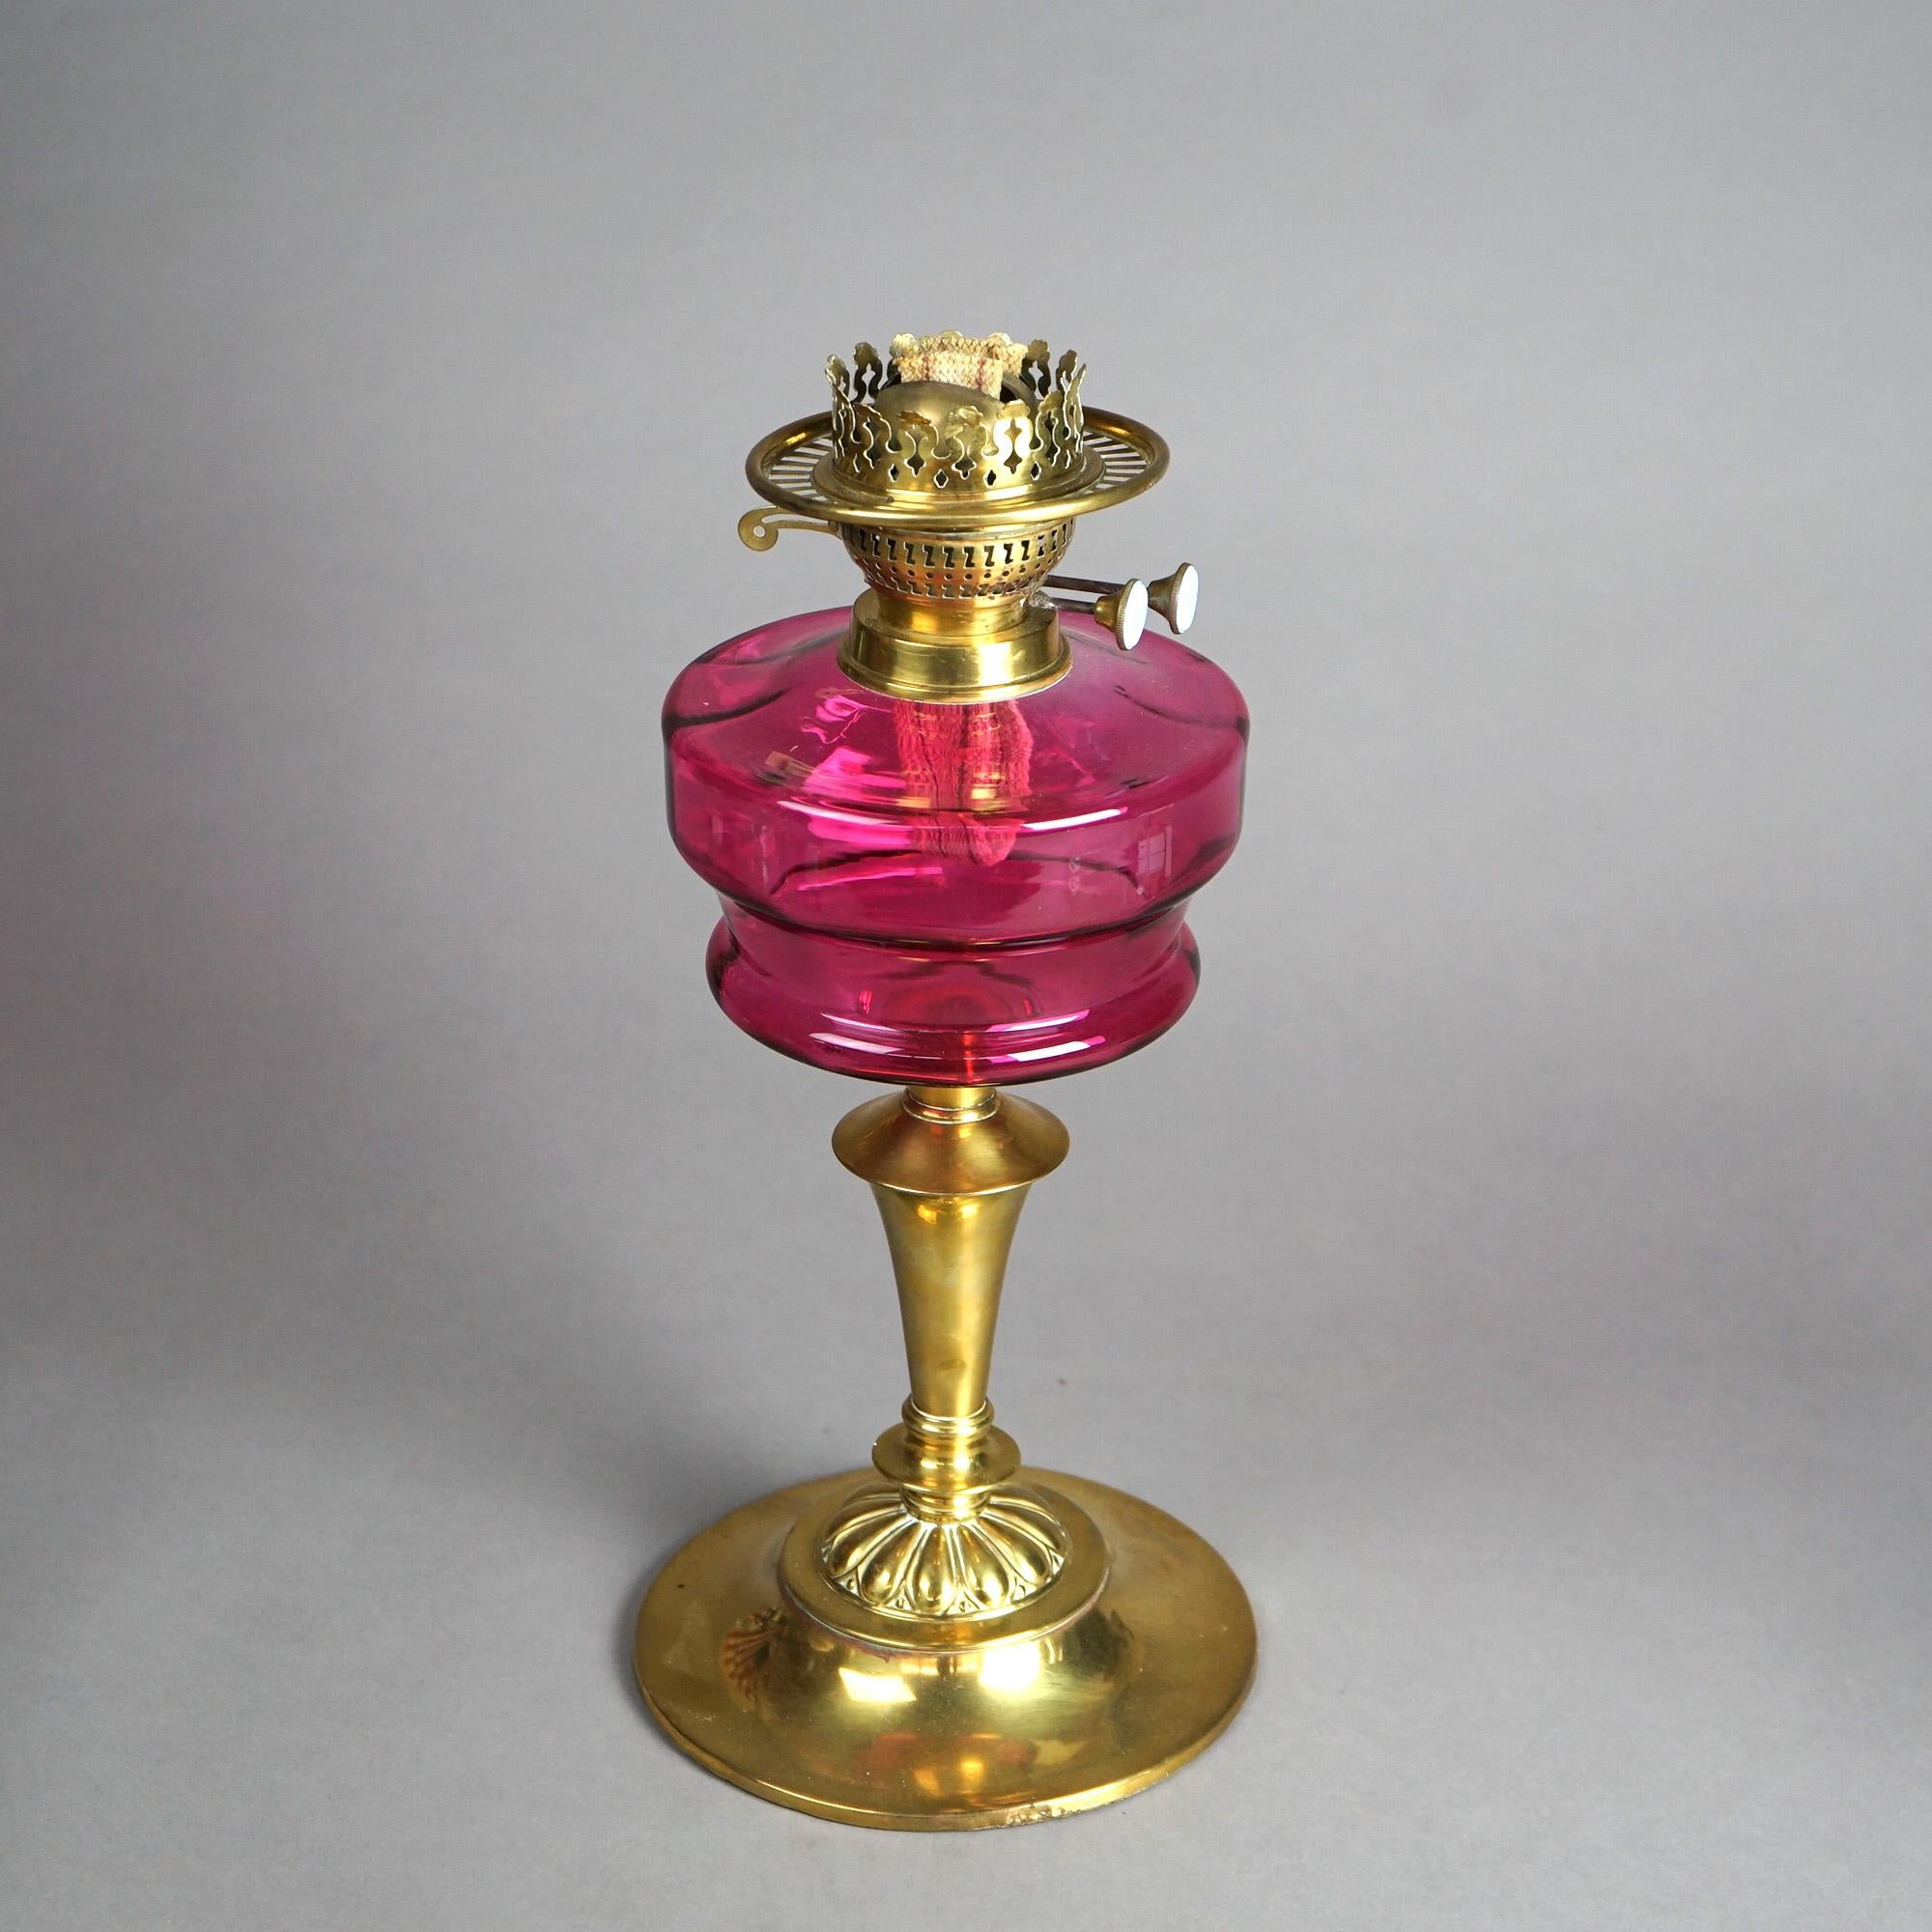 Antique Brass &Cranberry Glass “Gone With The Wind” Oil Lamp C1890 For Sale 4